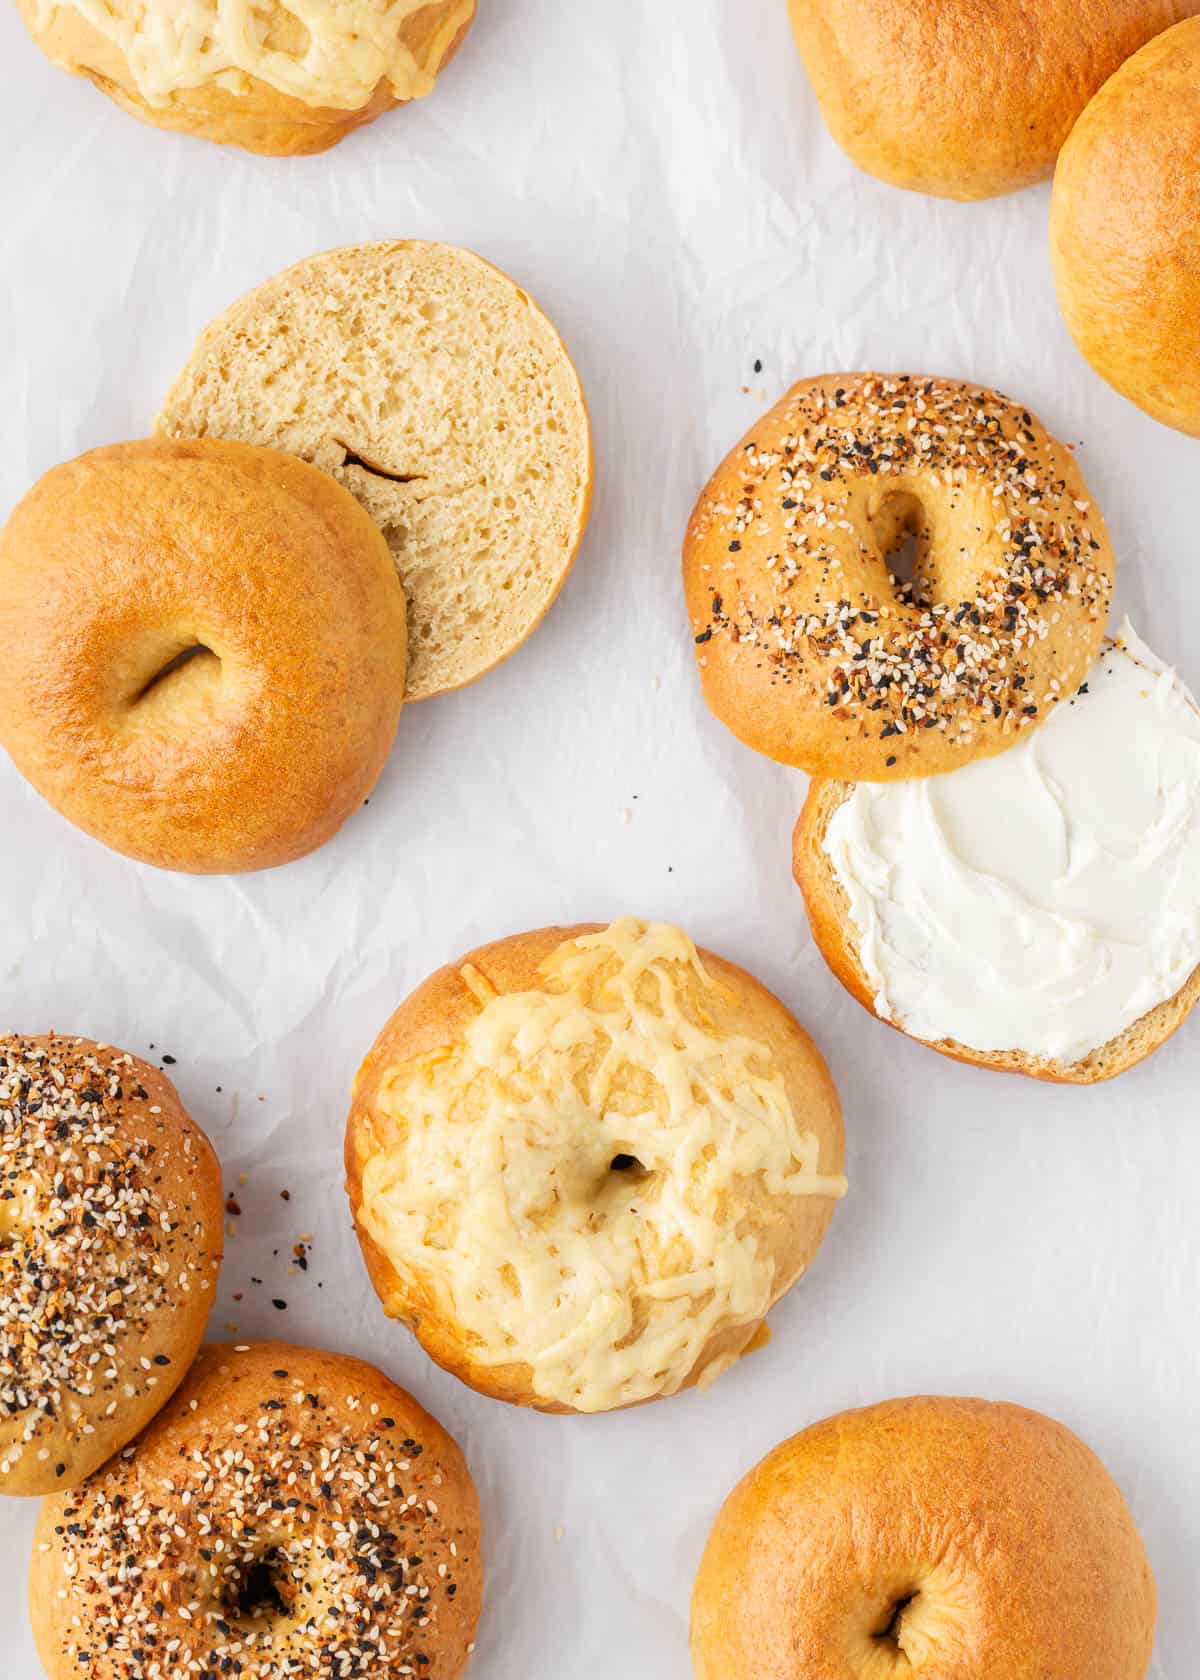 Homemade bagel recipe in the counter.